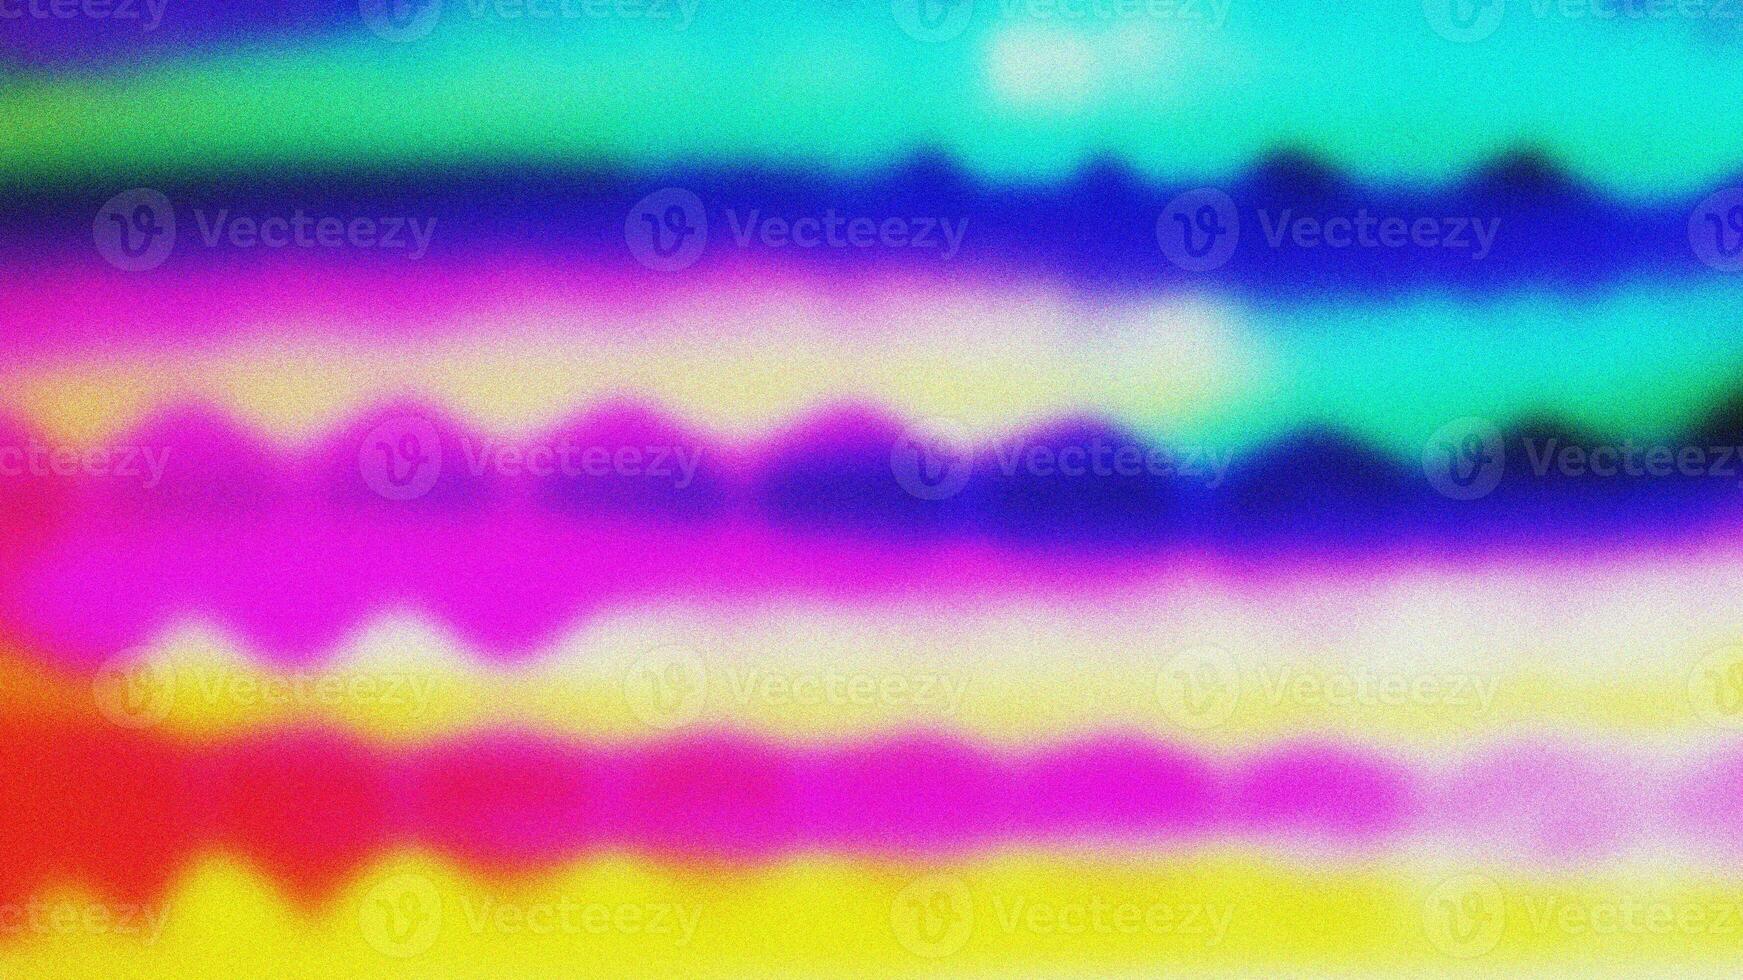 gradient blurred colorful with grain noise effect background, for art product design, social media, trendy,vintage,brochure,banner photo